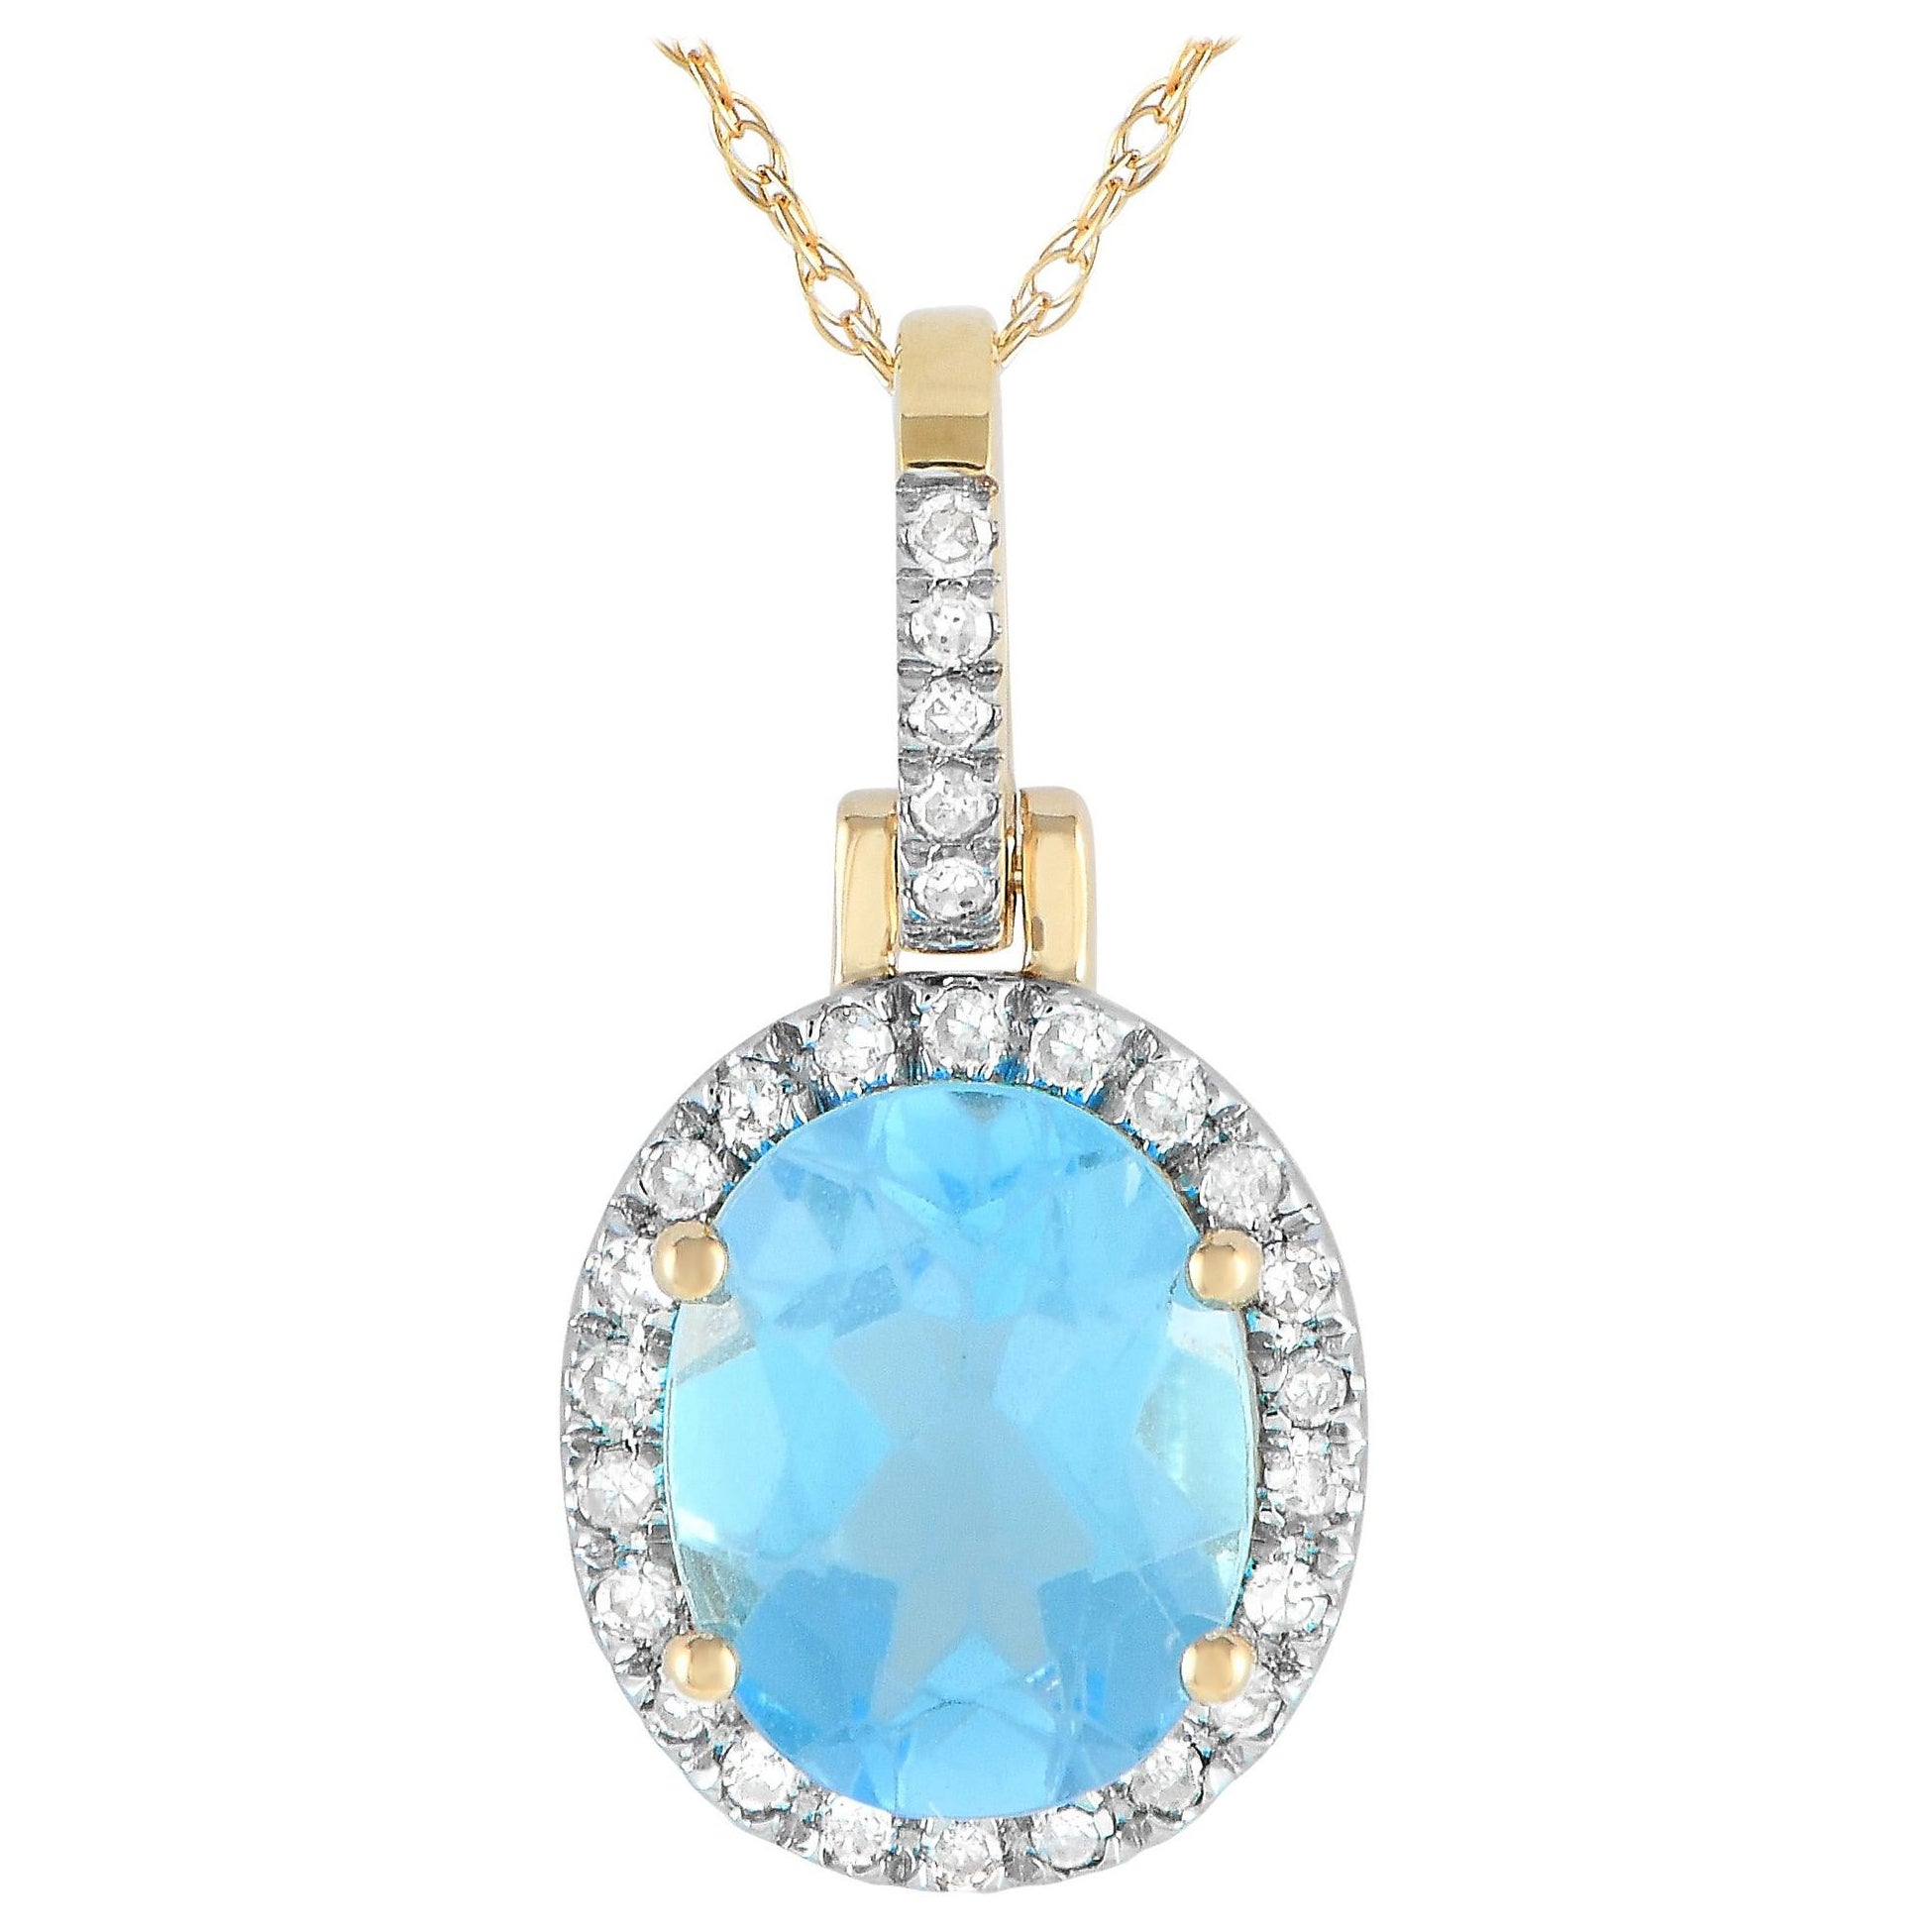 LB Exclusive 14K Yellow Gold 0.13ct Diamond & Topaz Oval Pendant PD4-15500YTB For Sale